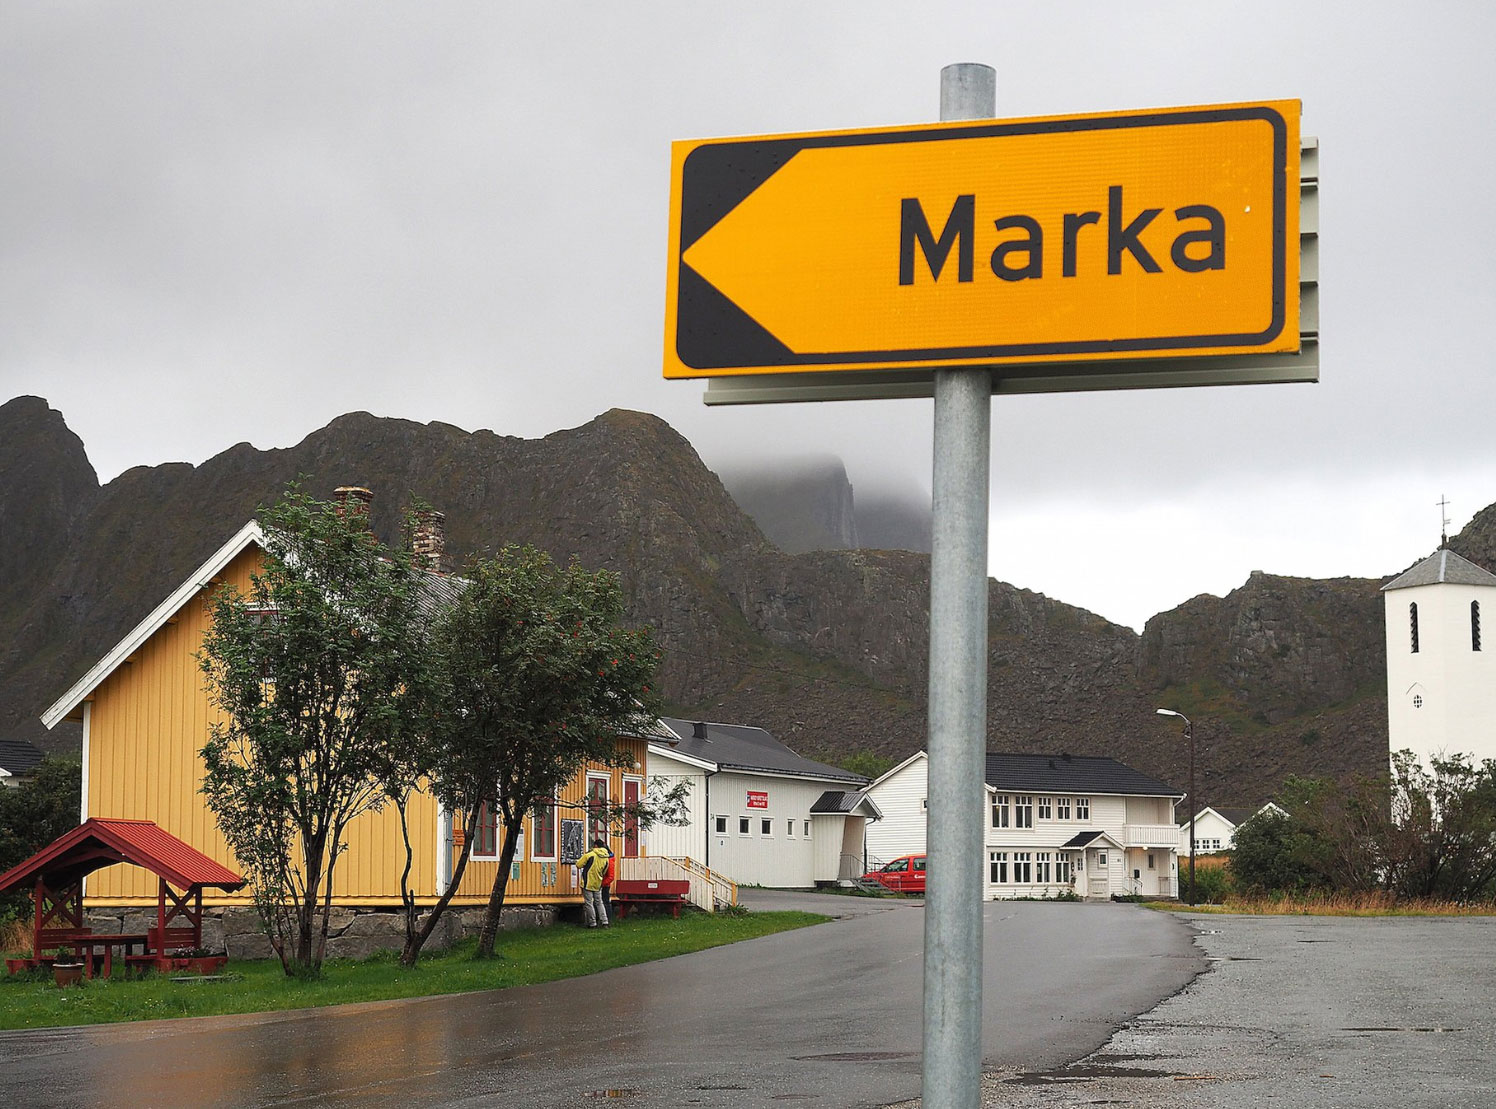 Marka in Basque means "Brand"